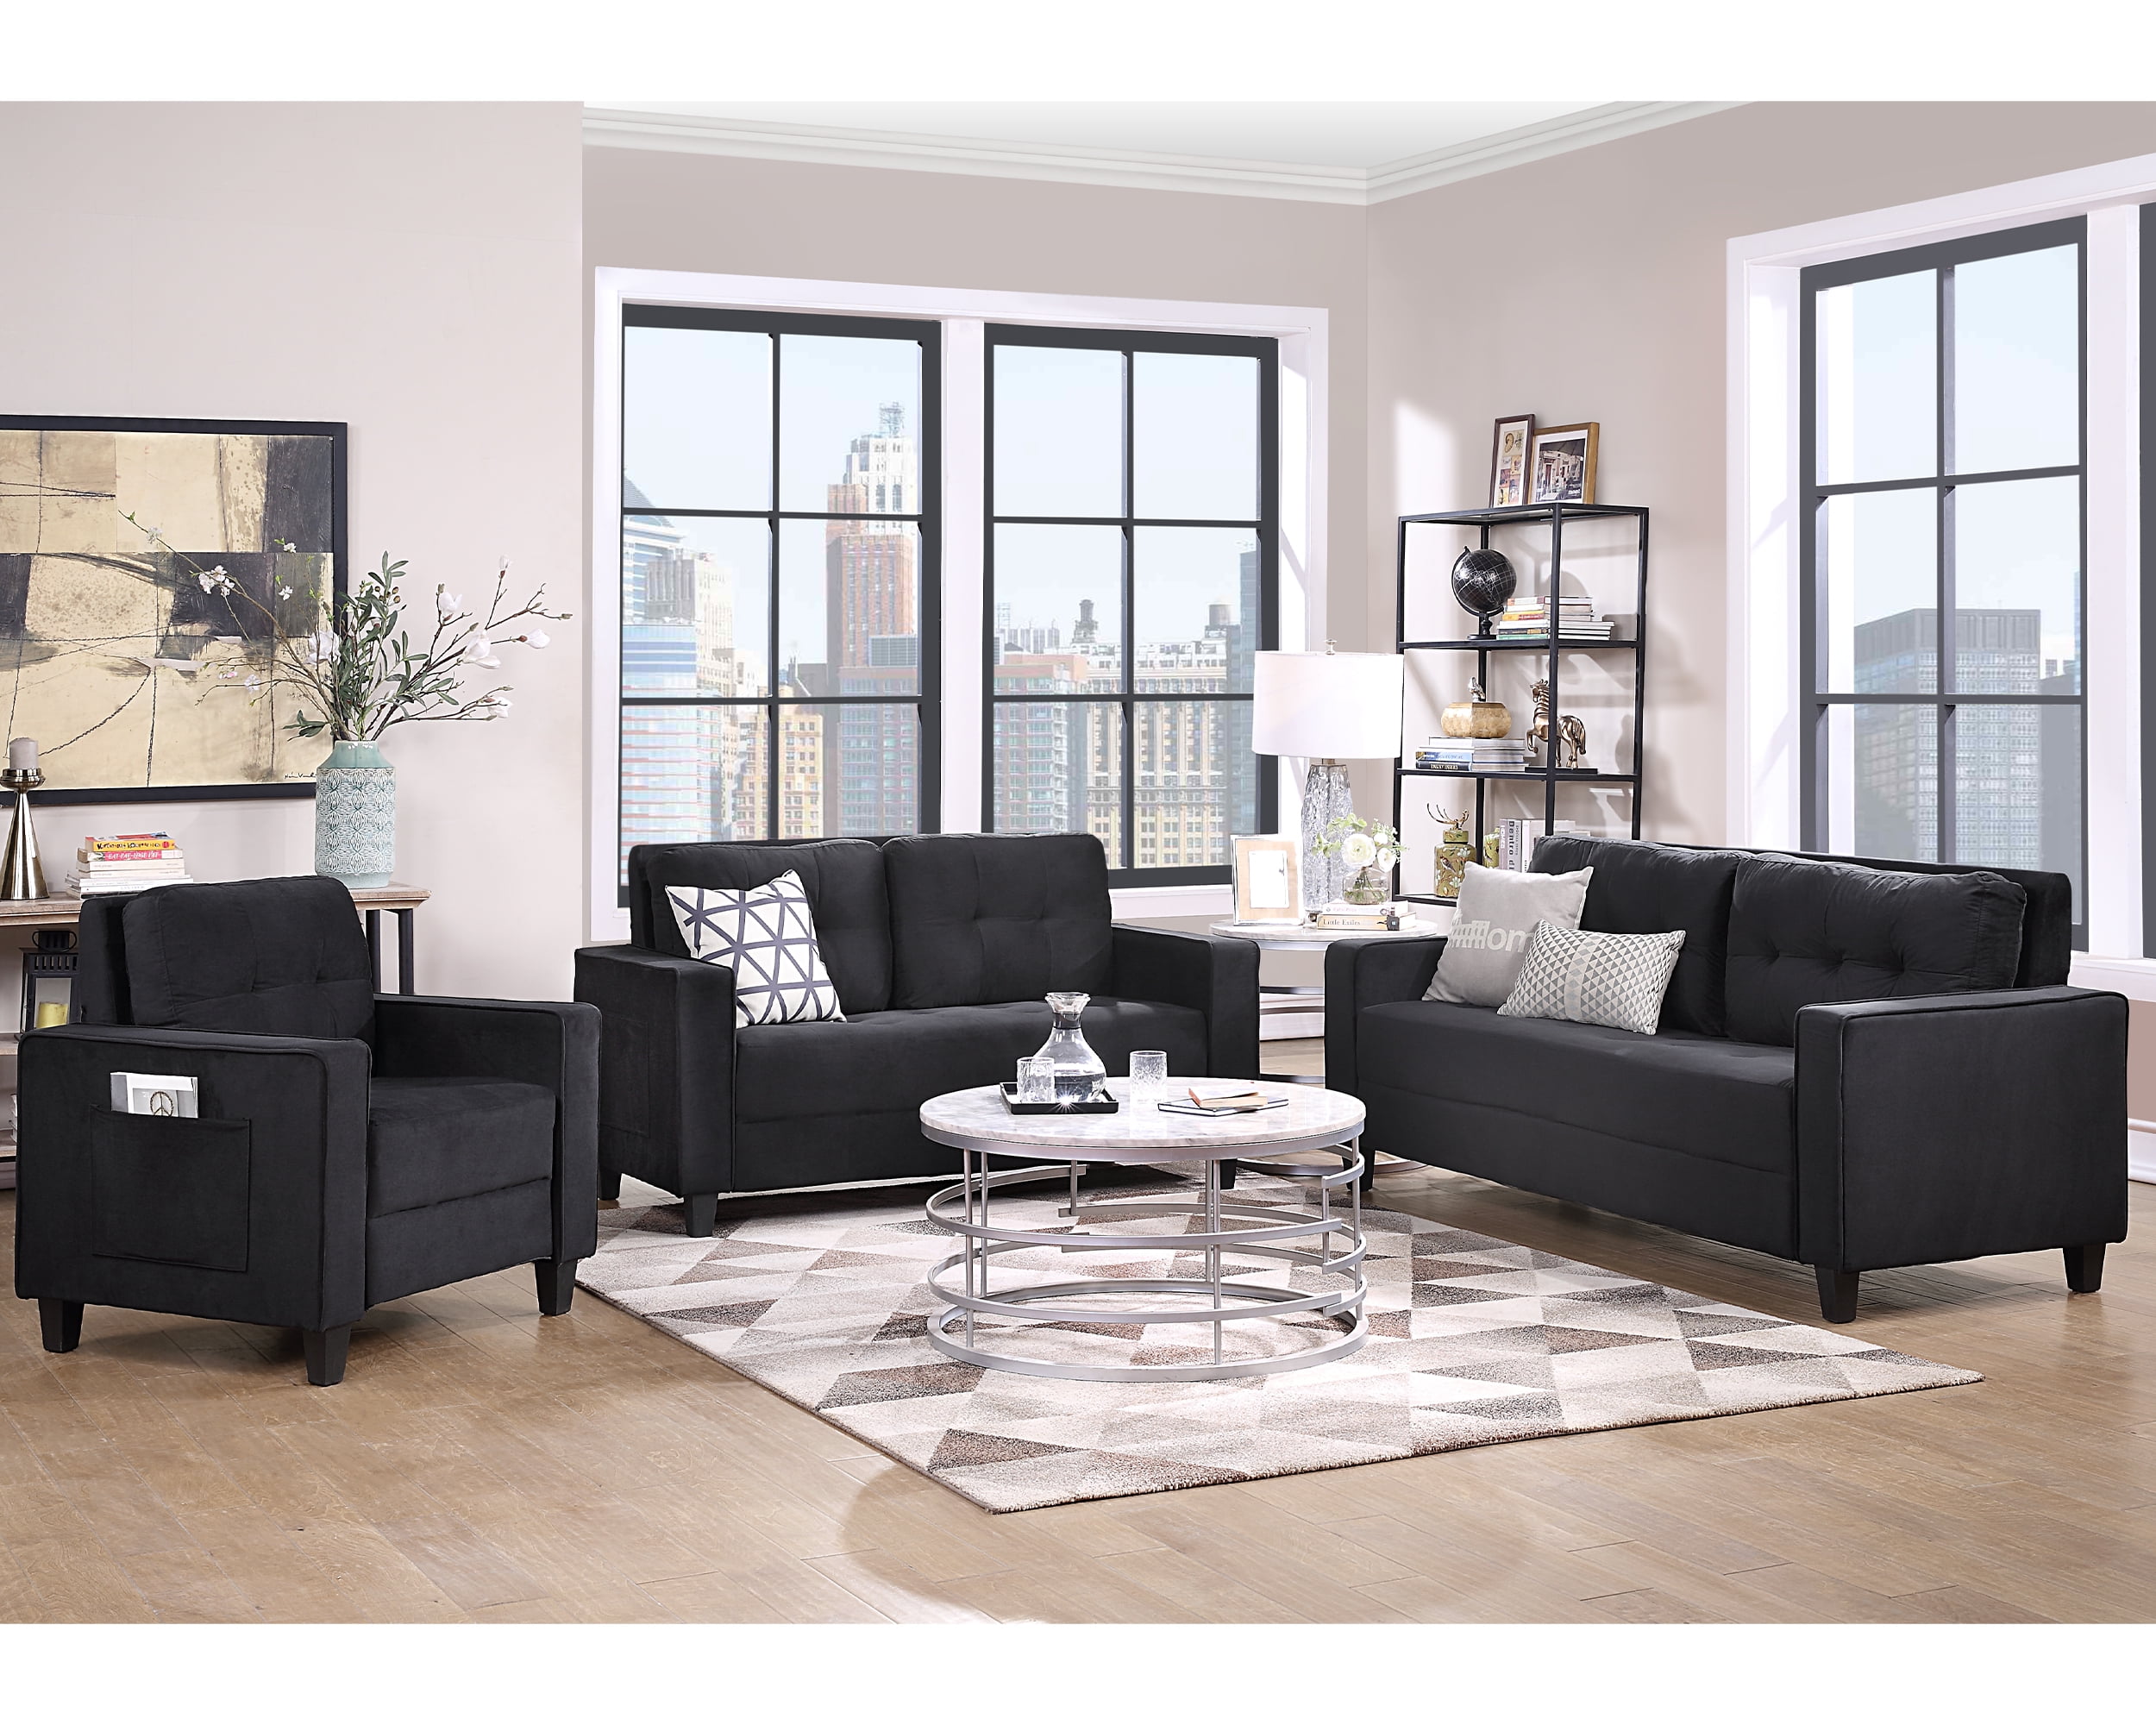 Loveseat Details about   1/2/3 Seat Sofa Set Morden Style Couch Furniture Upholstered Armchair 